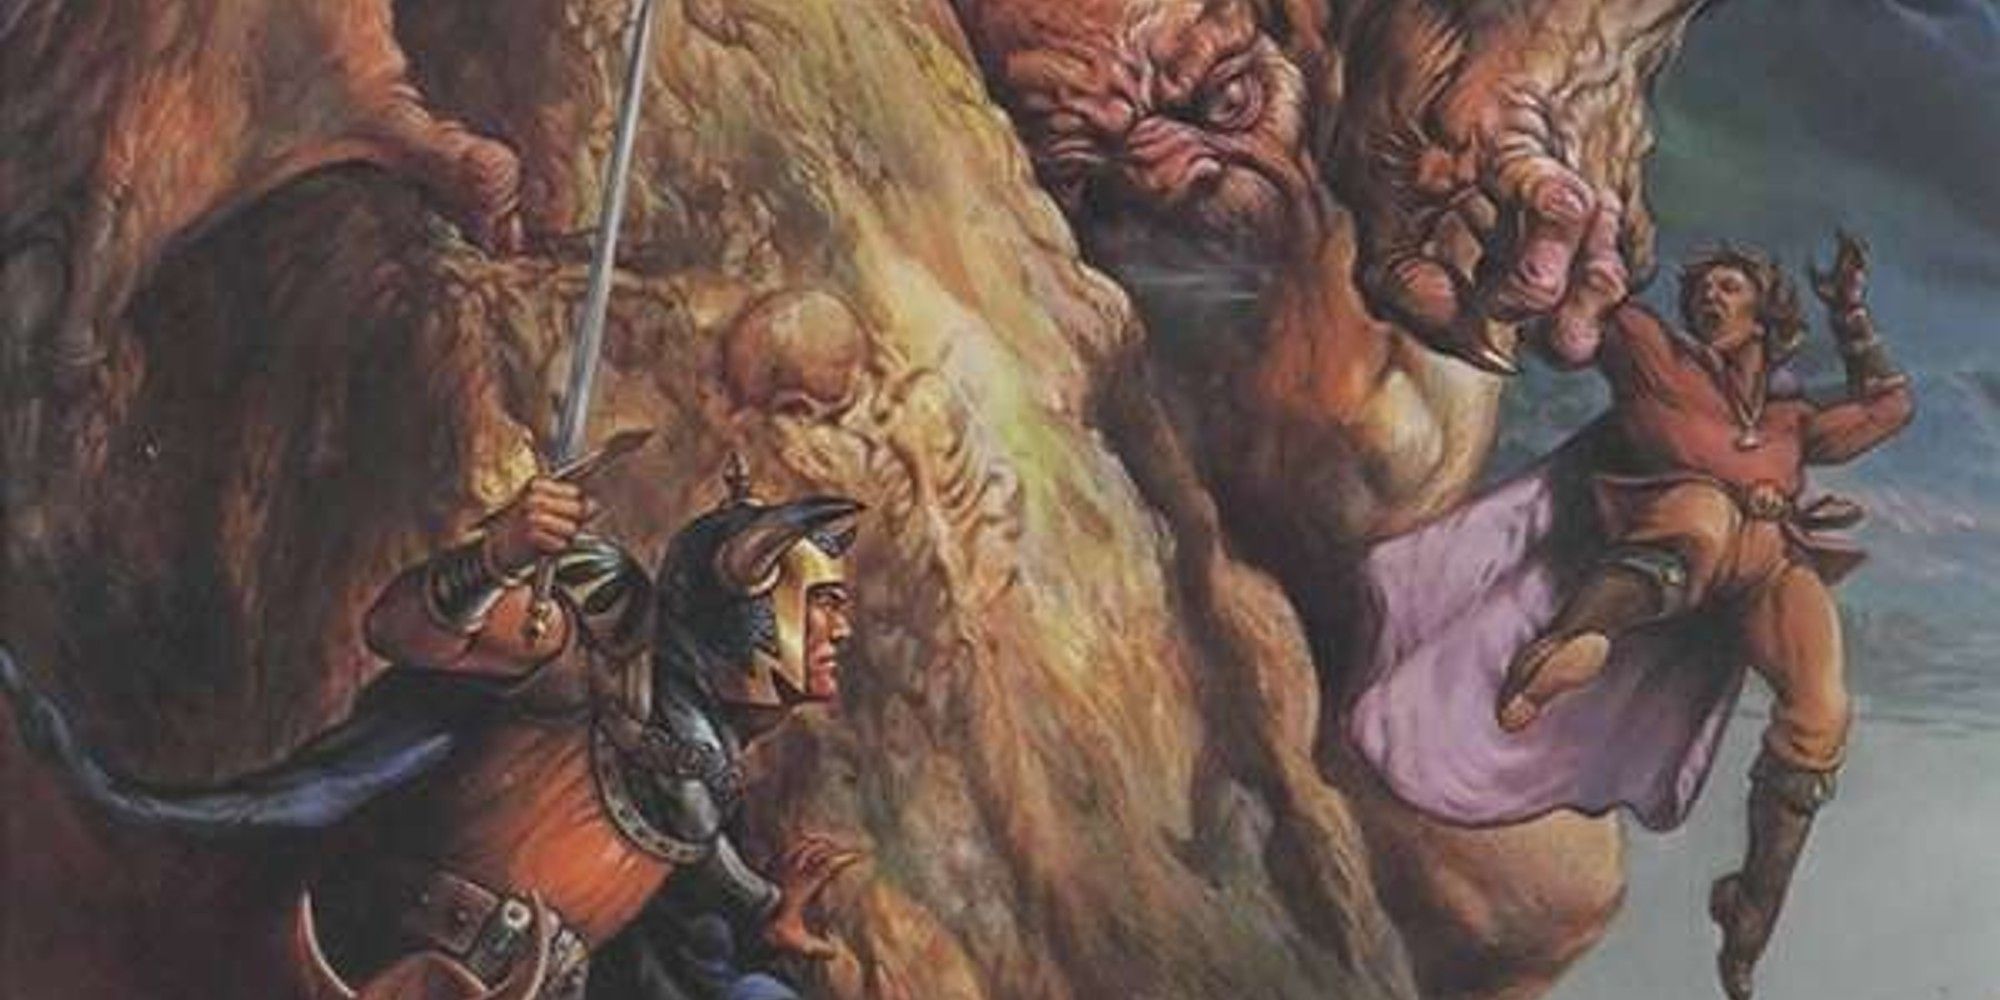 6 D&D Magic Items & Spells That Are Really Just Helping You Break The Rules - A cropped image of the cover of the 1e Advanced Dungeons and Dragons Wilderness survival guide